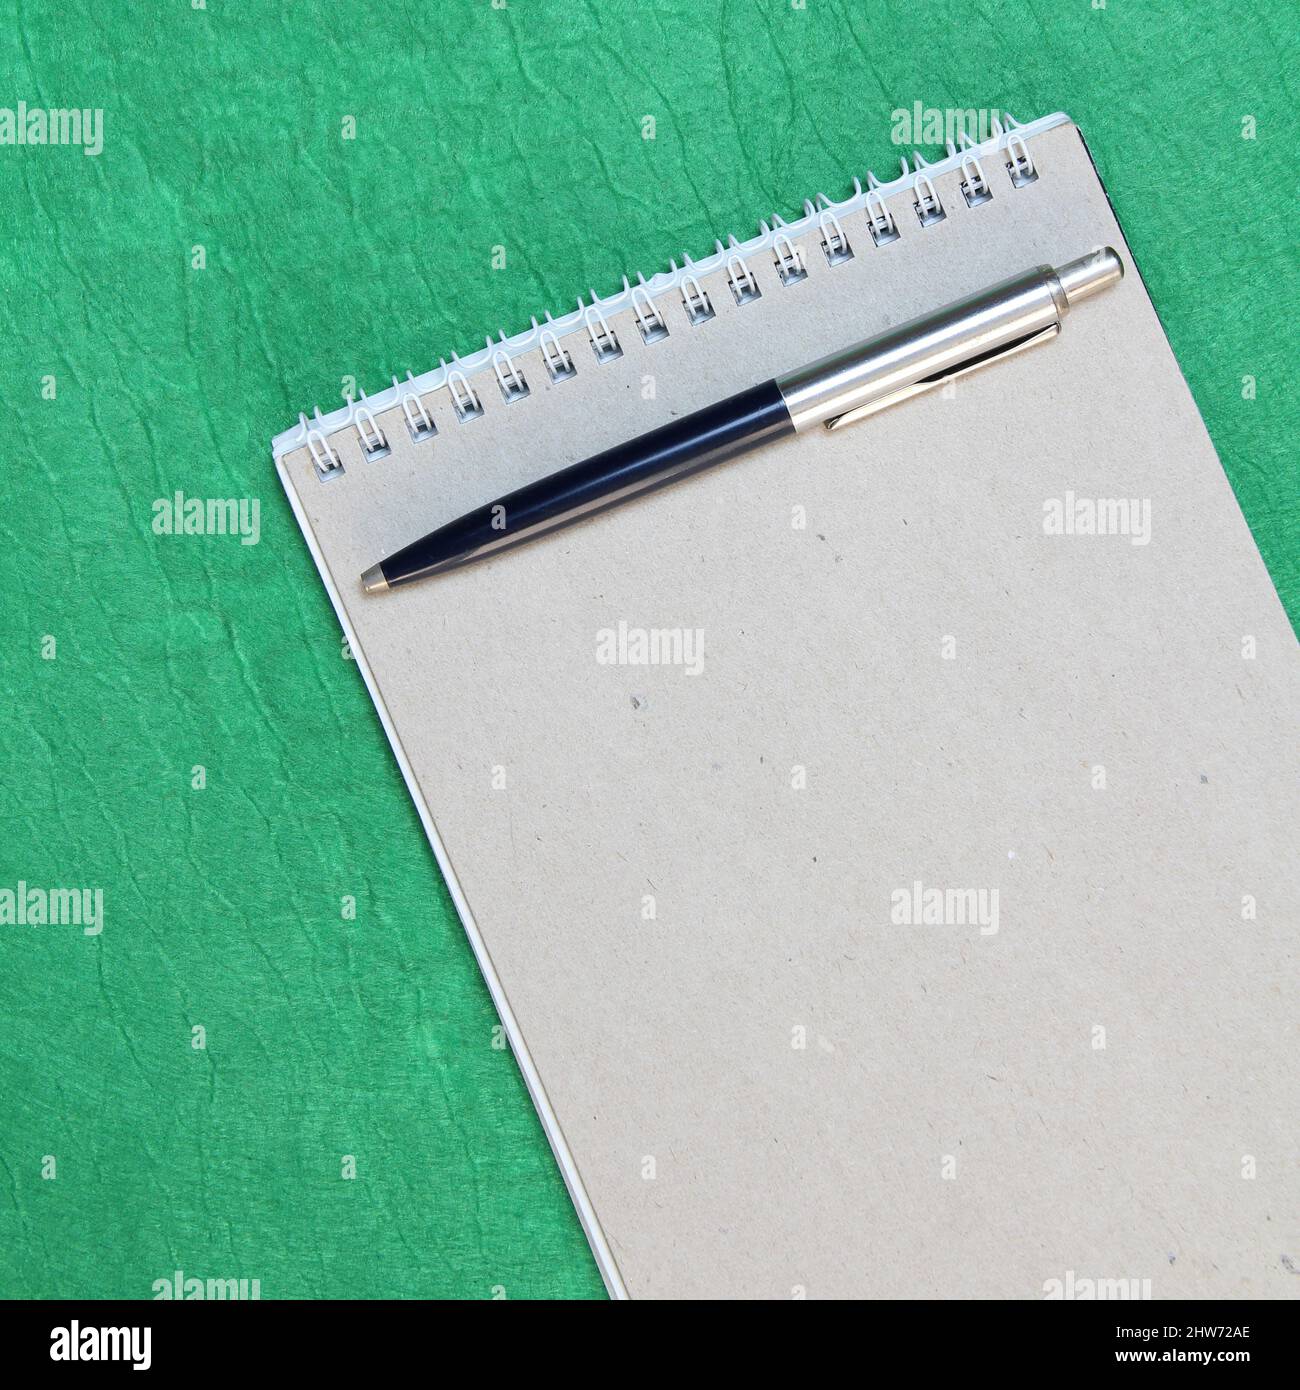 White and gray notepad sheet with spiral with pen against the background of green fabric. Concept of analysis, study, attentive work. Stock photo with empty place for your text and design. Square image shape. Stock Photo